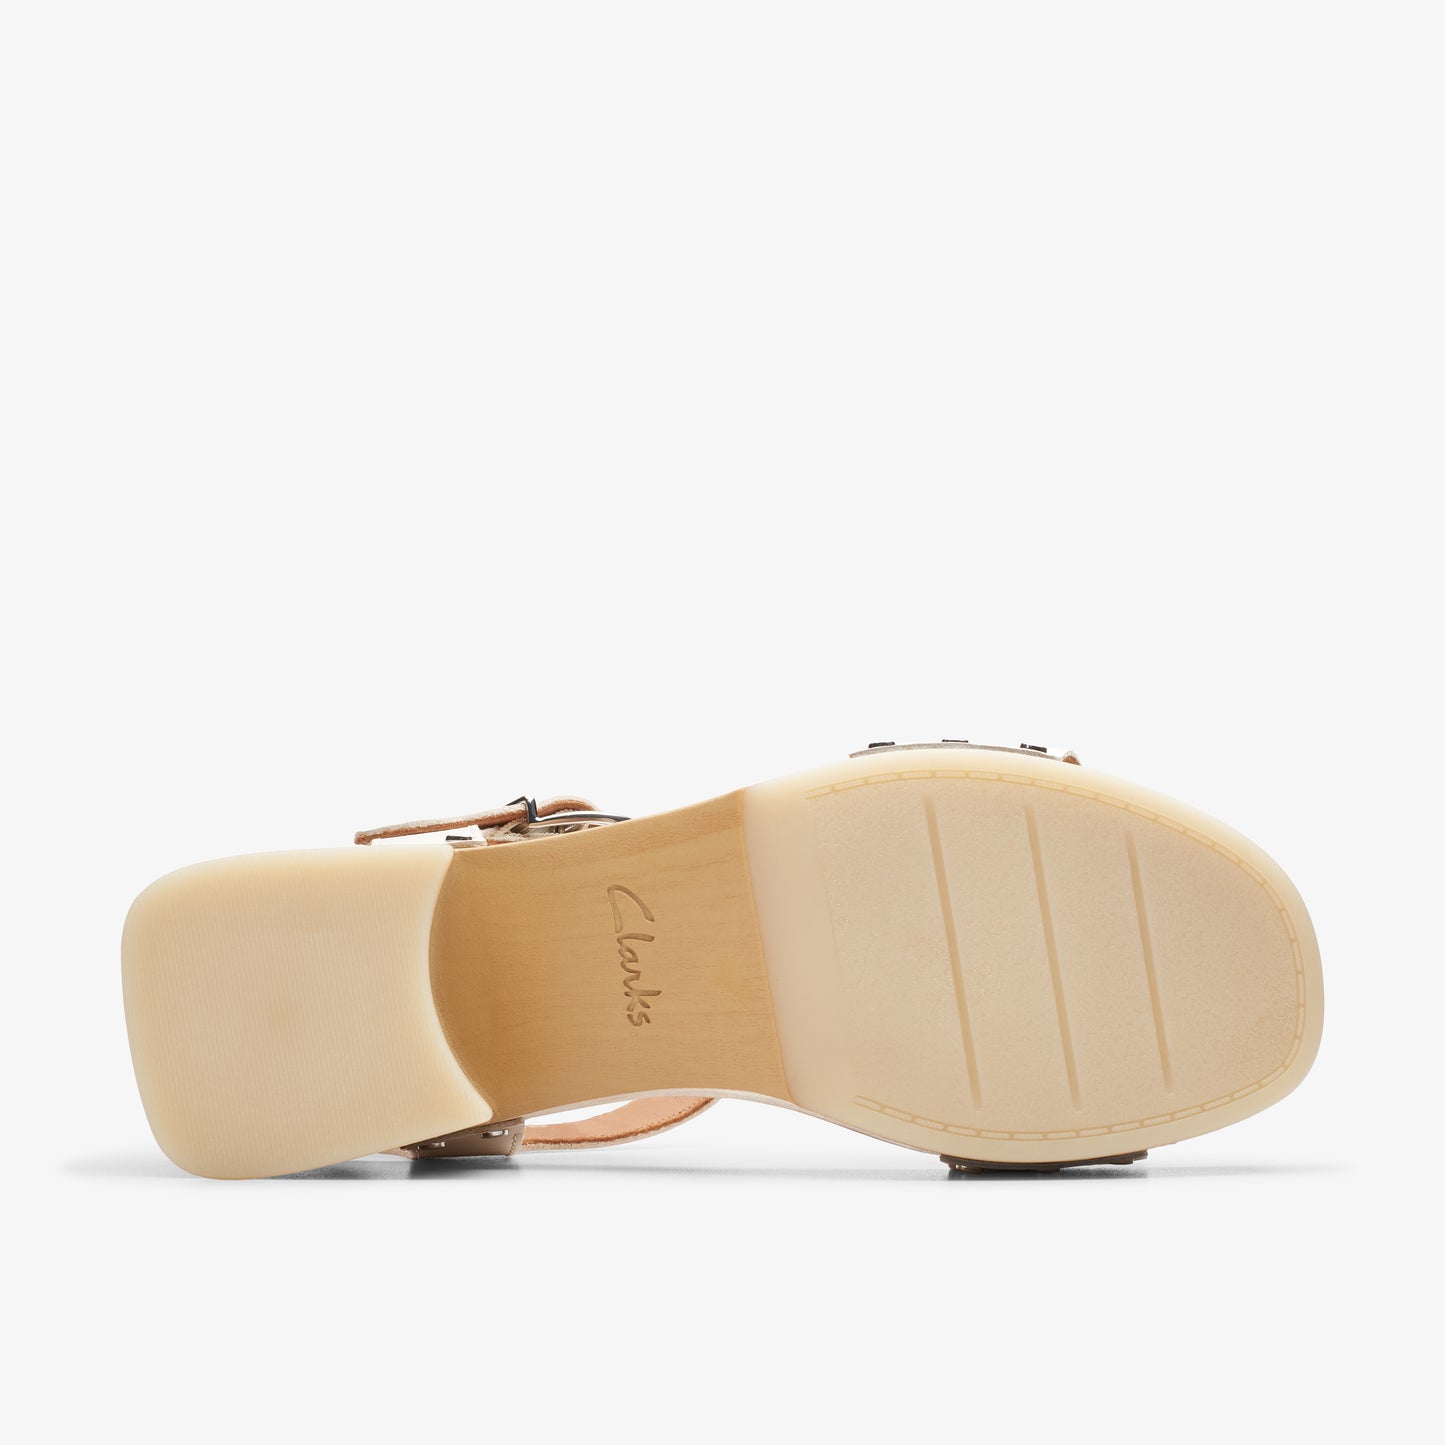 Sivanne Bay Leather Ivory Interest